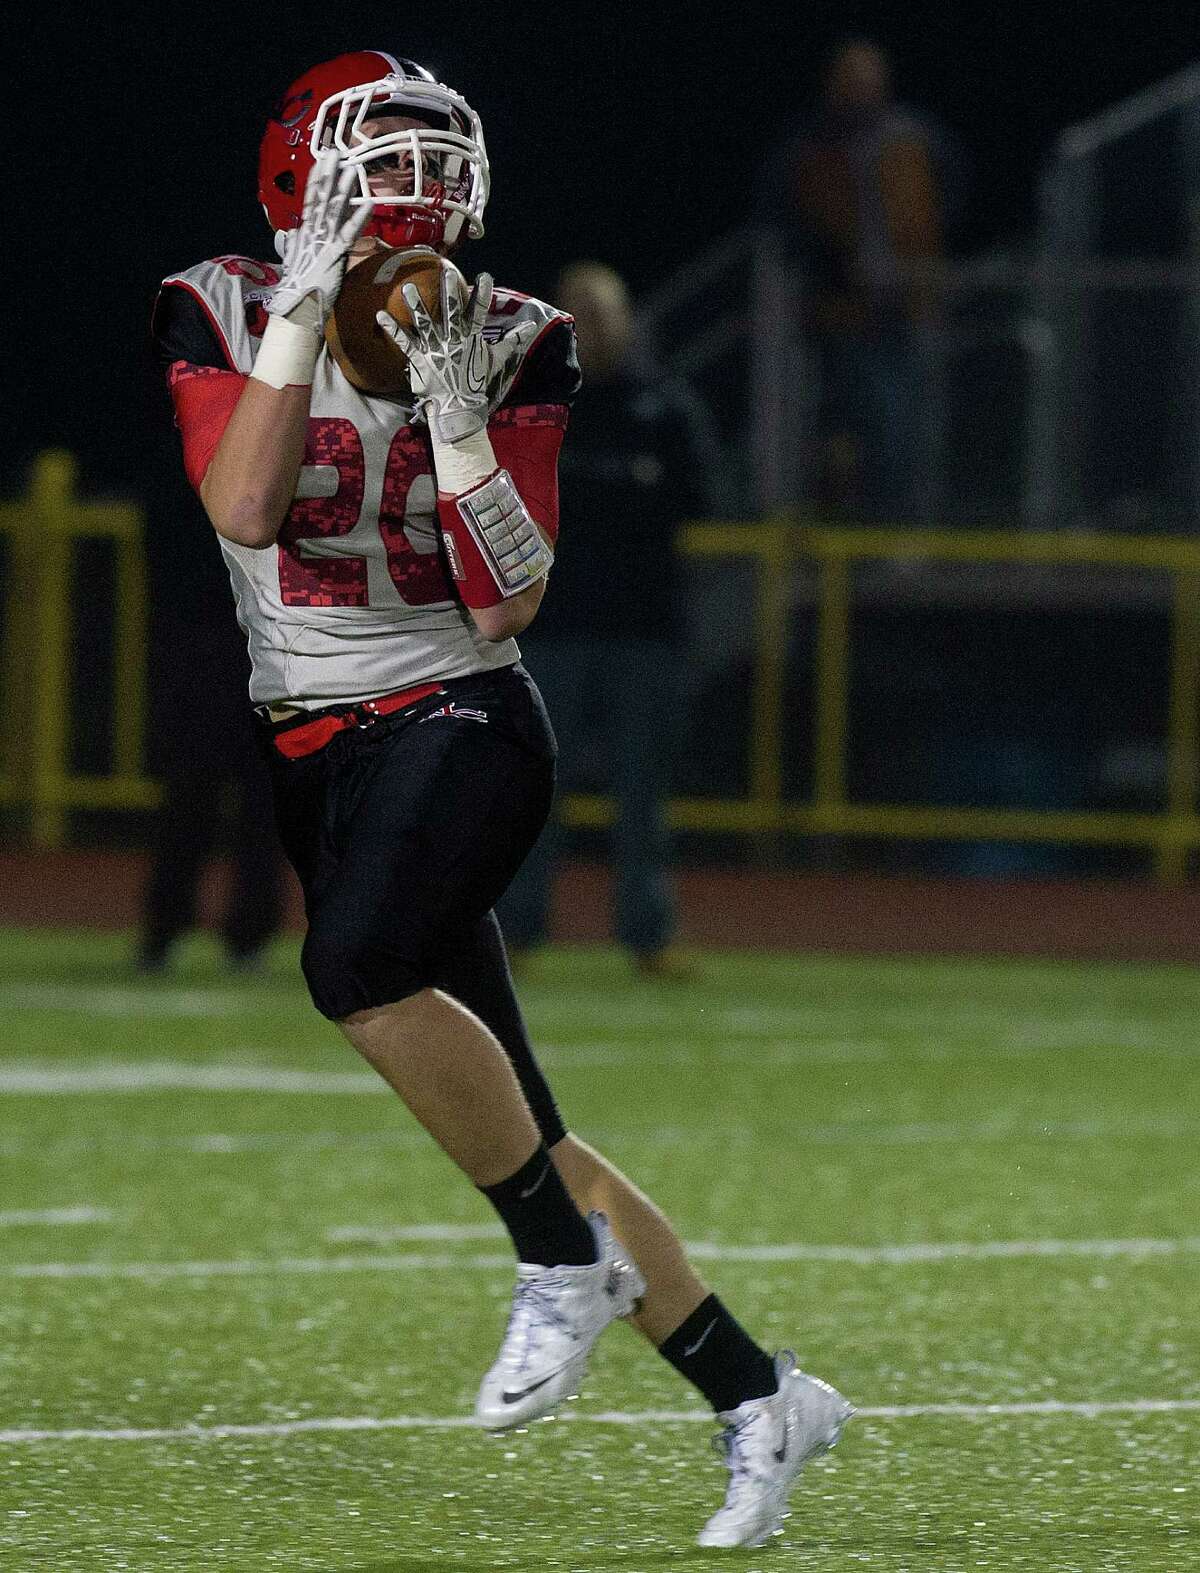 New Canaan's Kyle Smith makes a catch and runs for a touchdown during Friday's FCIAC championship game at Trumbull High School on November 22, 2013.